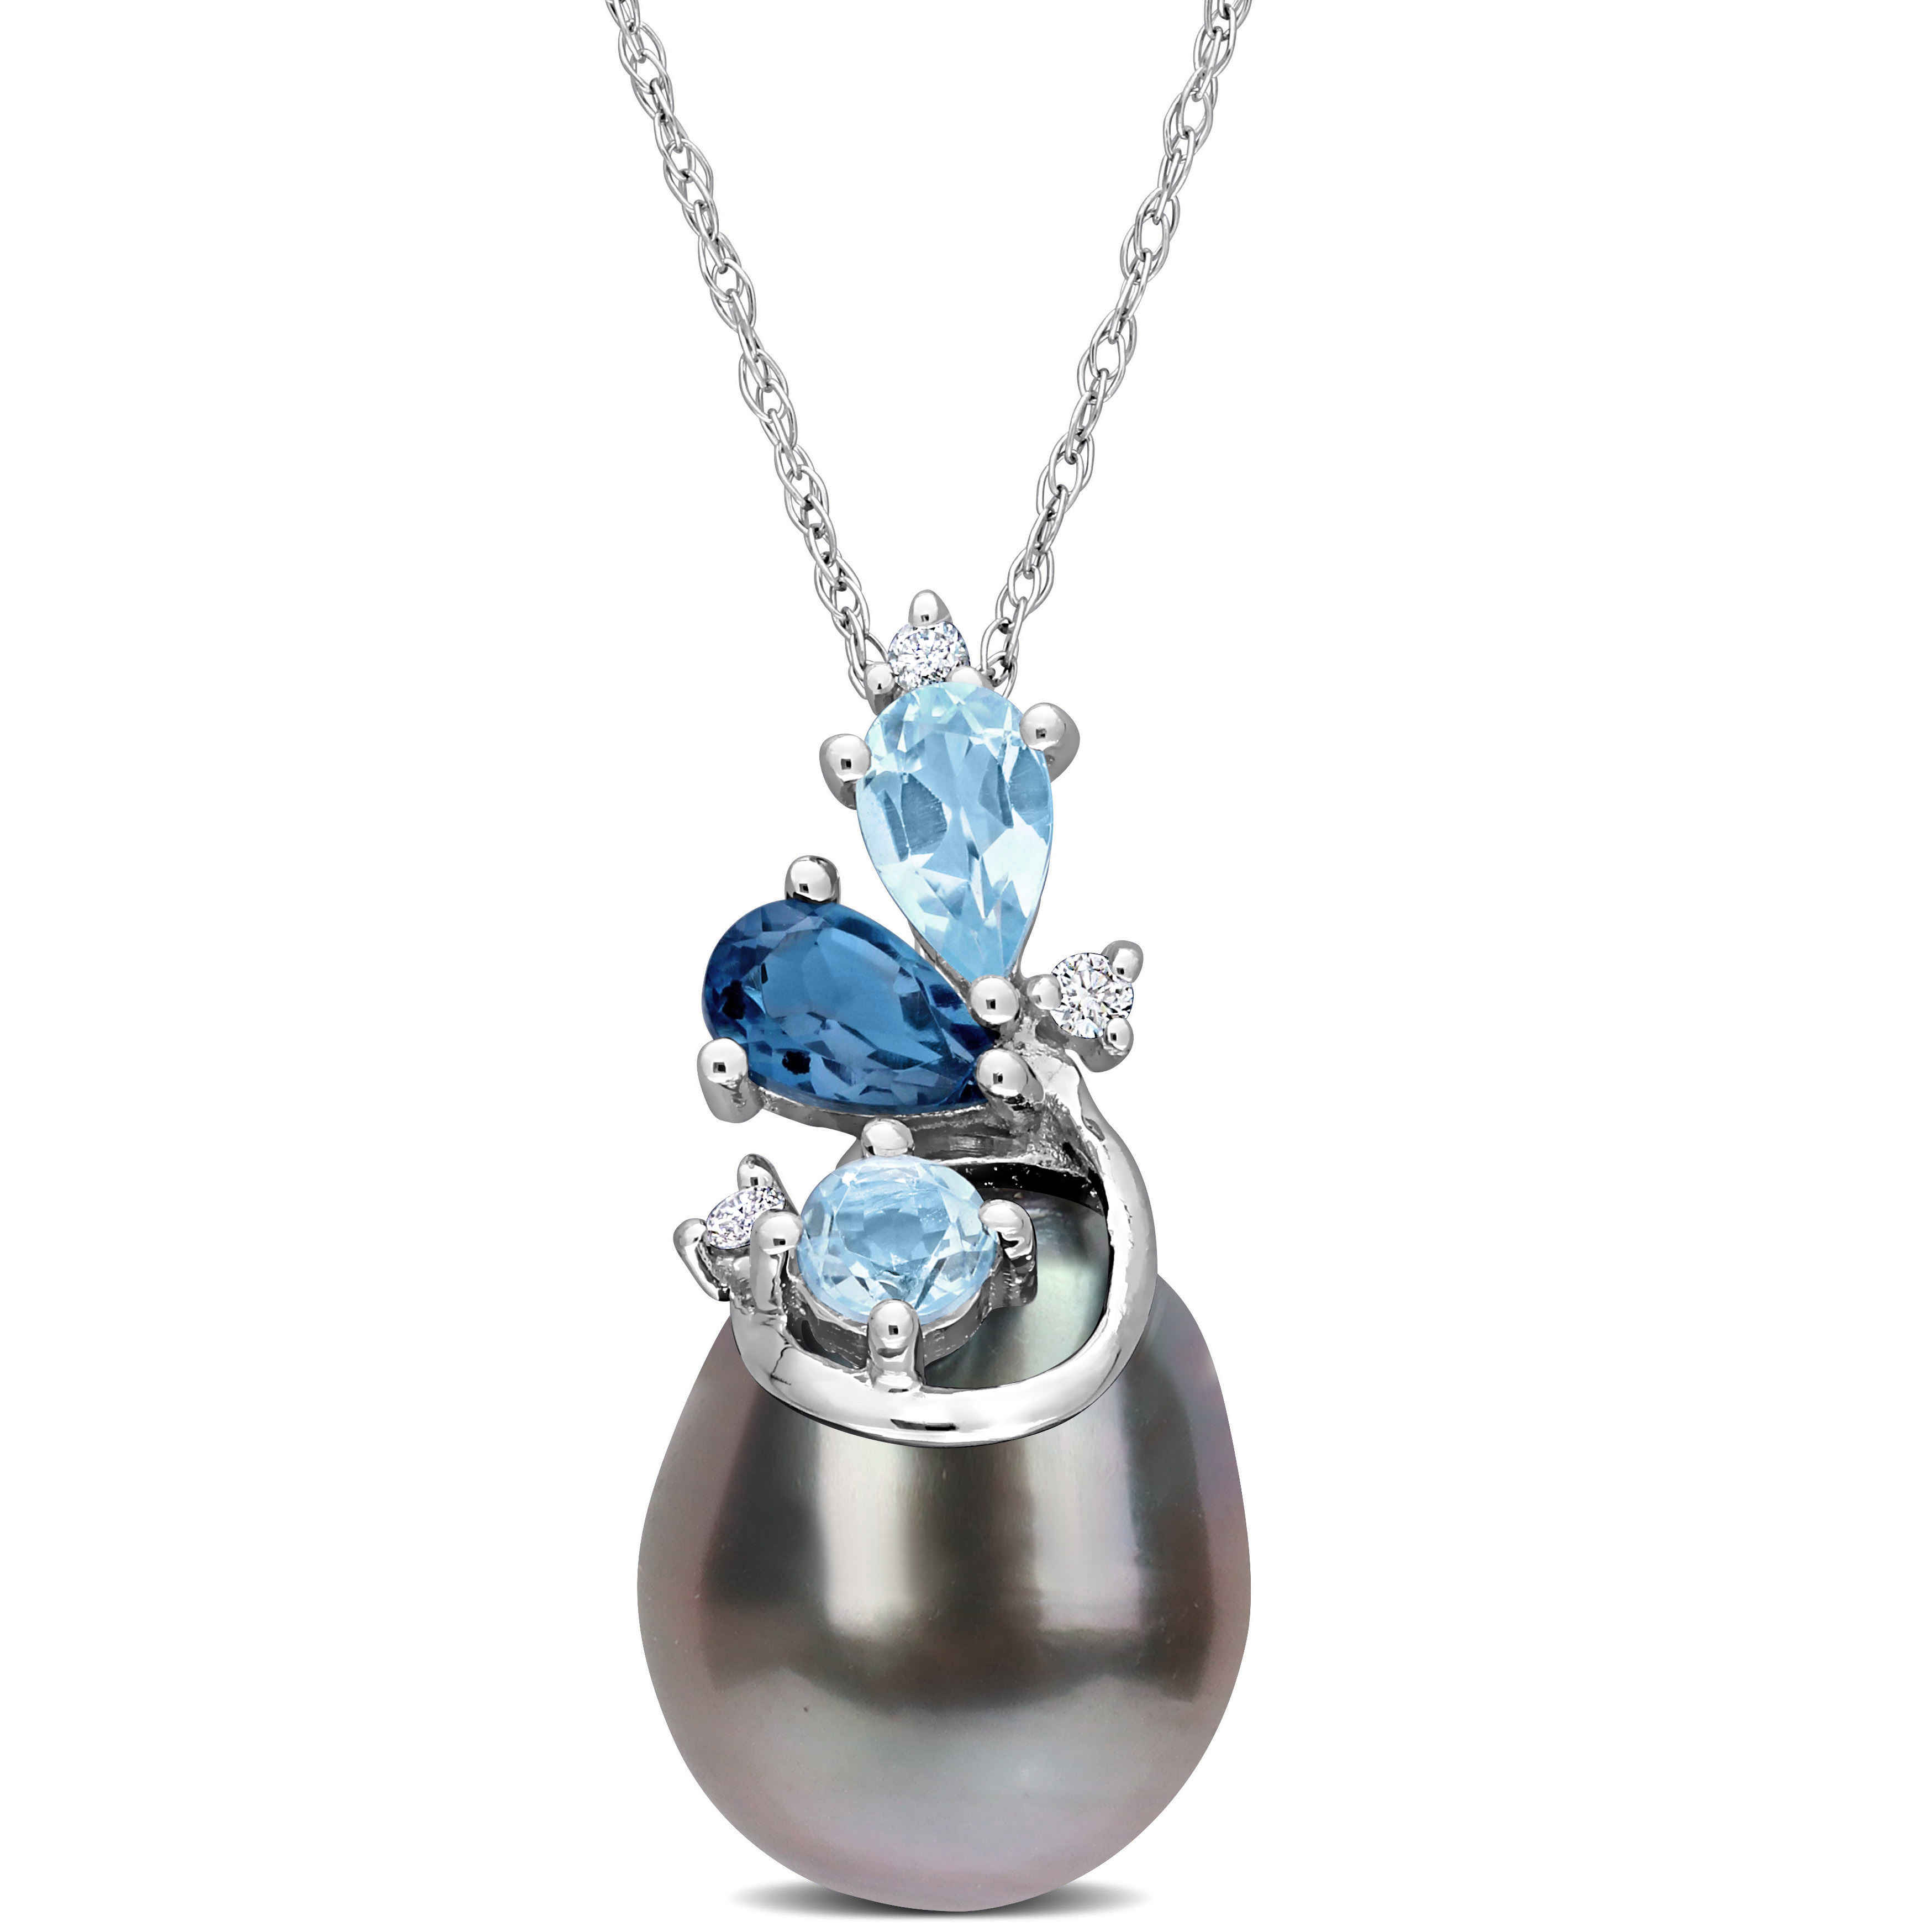 9-10 MM Black Tahitian Cultured Pearl 5/8 CT TGW Blue Topaz London and Blue Topaz Sky with Diamond Accent Pendant with Chain in 14k White Gold